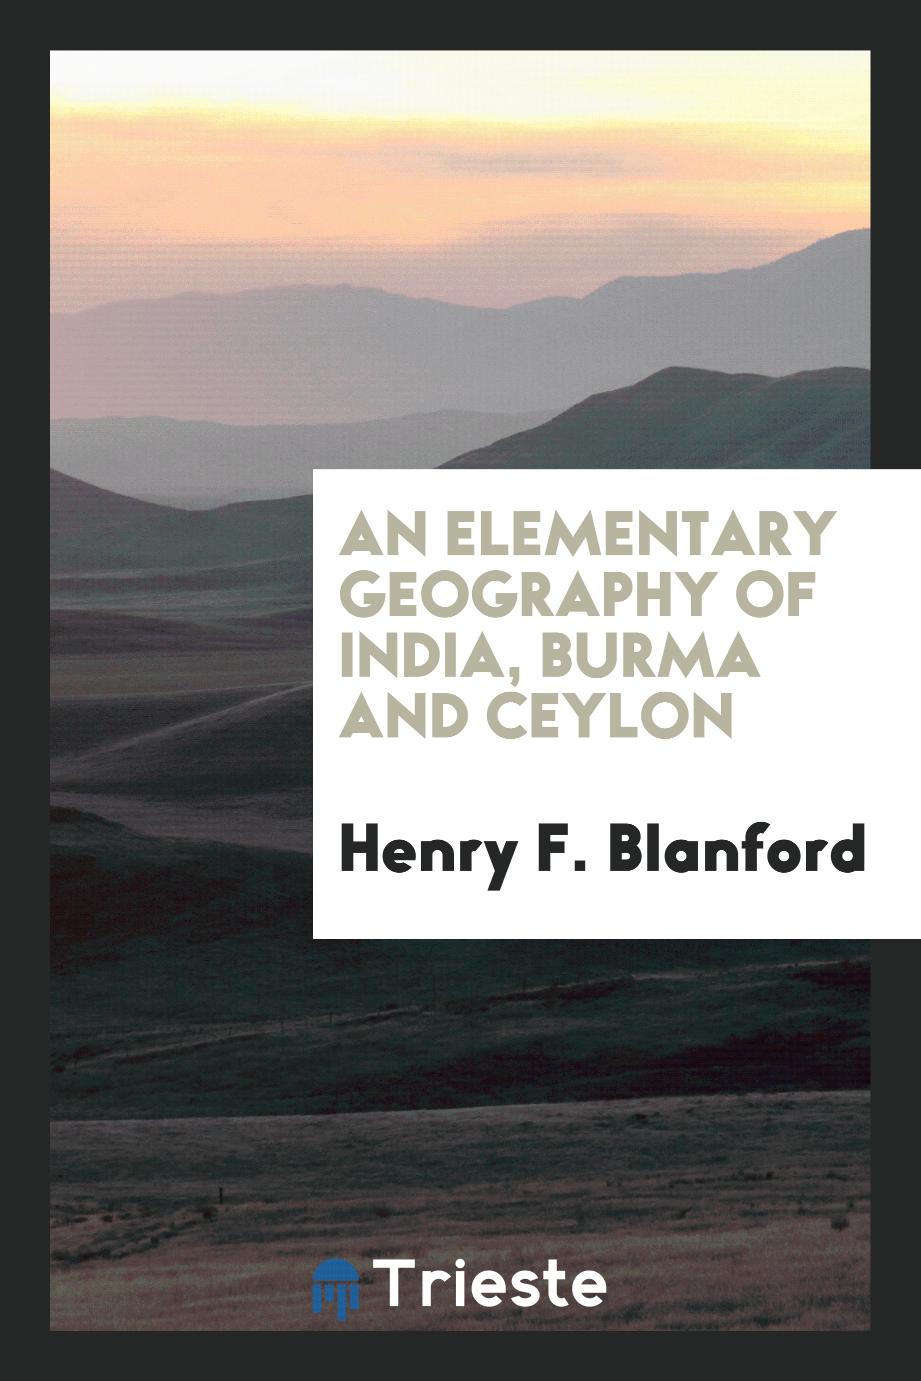 An elementary geography of India, Burma and Ceylon